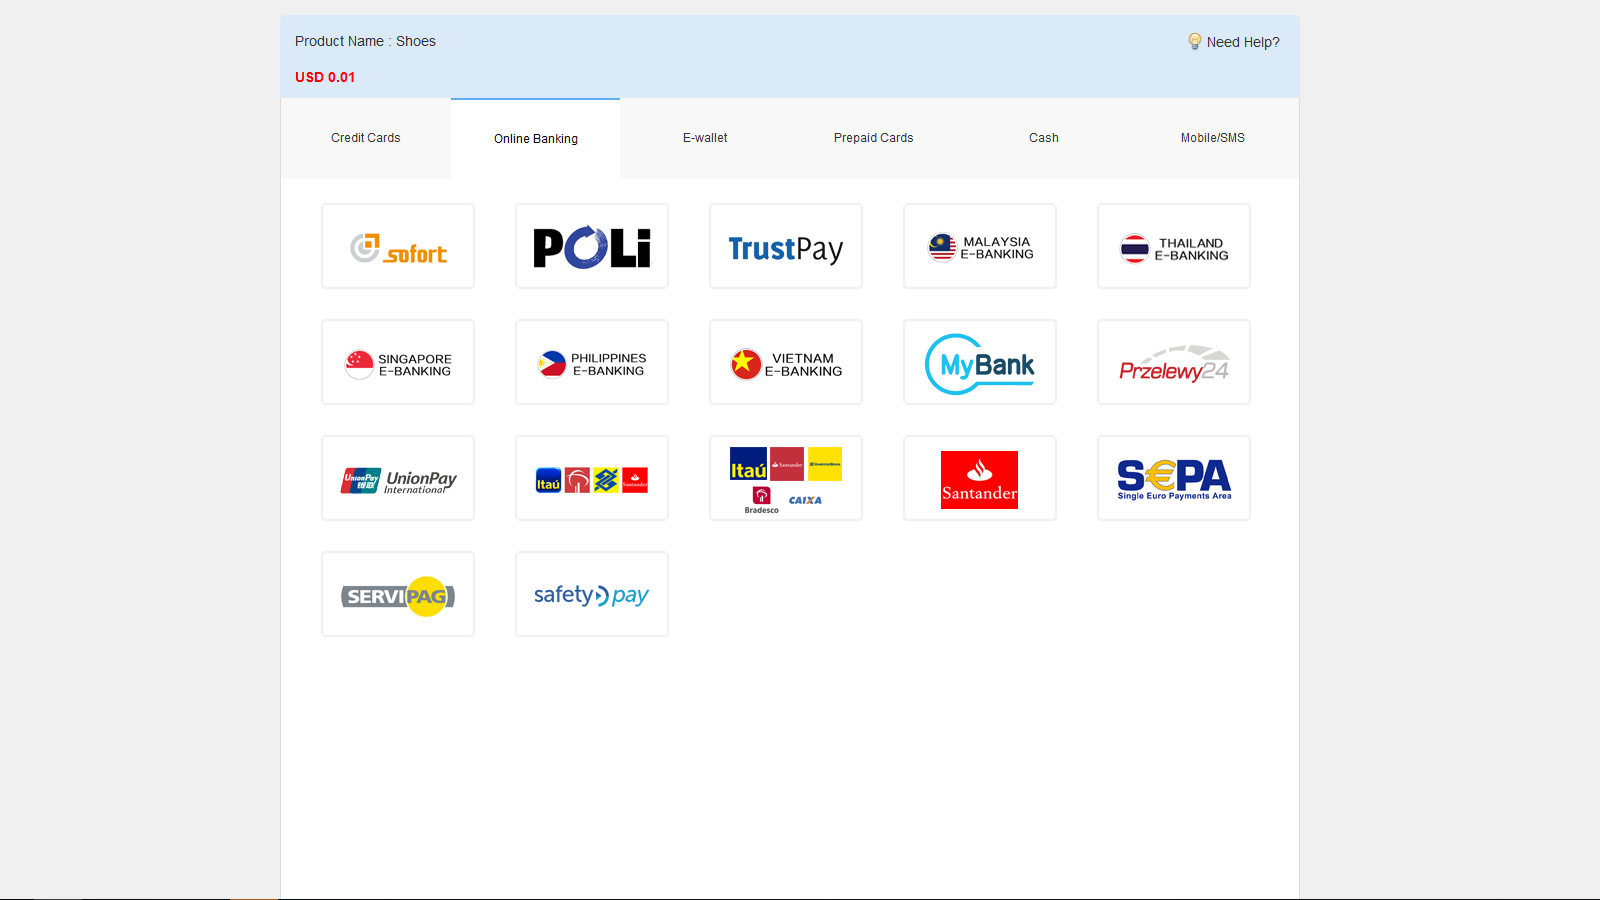 L.Pay Pay payment page.